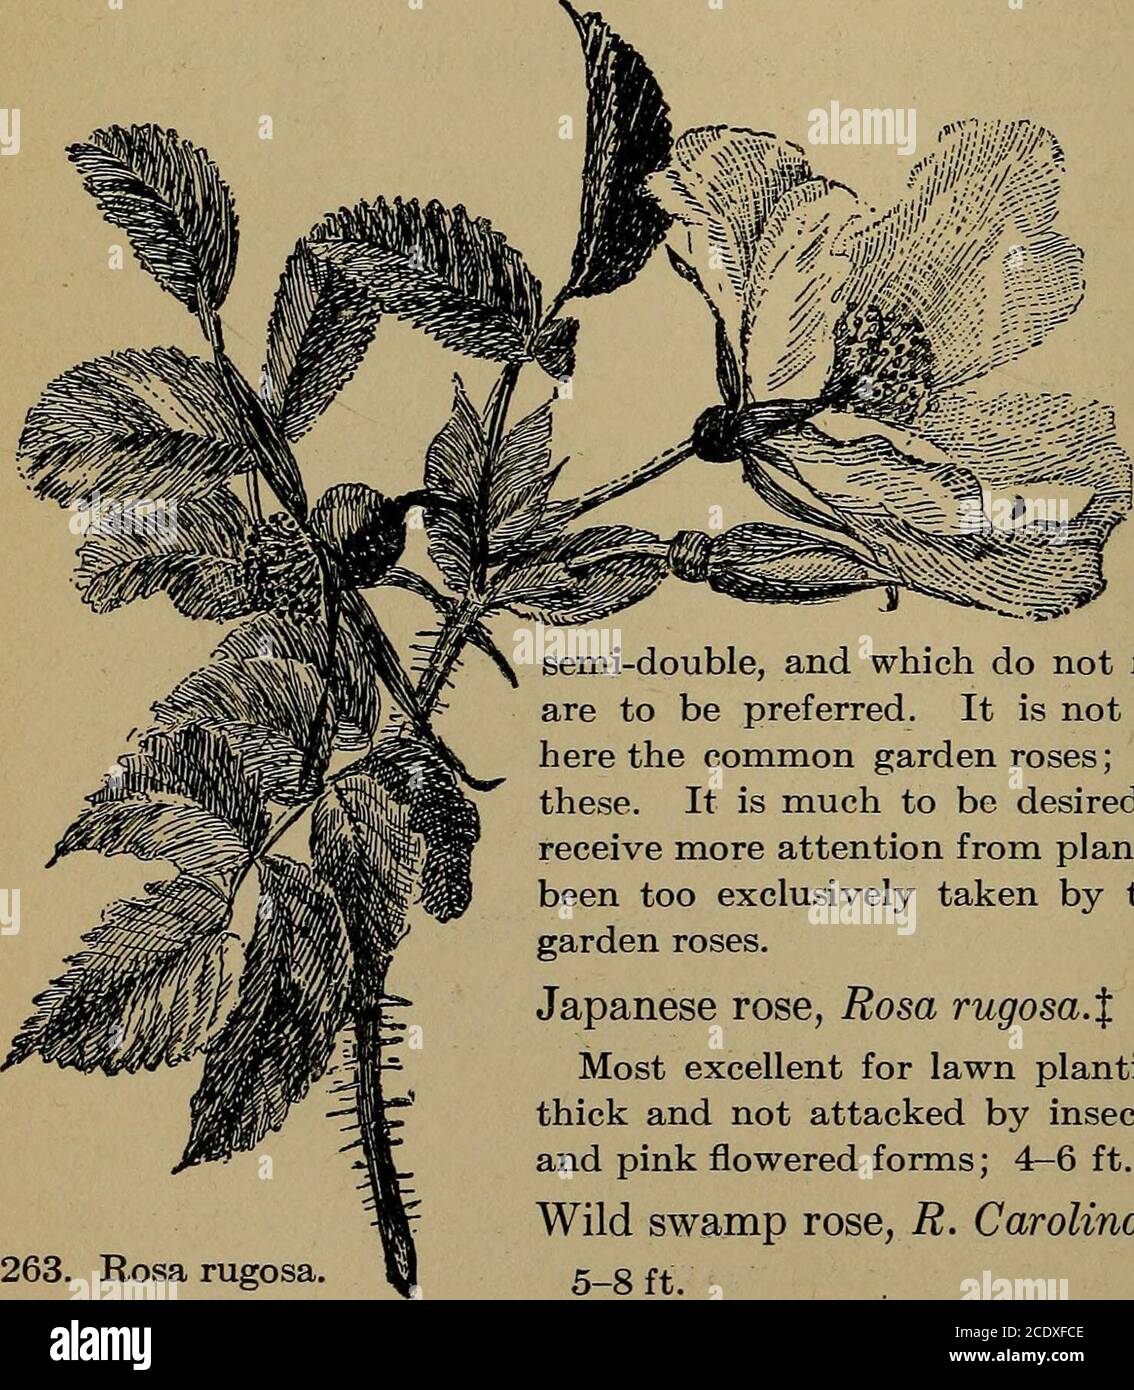 . Manual of gardening; a practical guide to the making of home grounds and the growing of flowers, fruits, and vegetables for home use . grant currant, Ribes aureum.*% Well known and popular, for its sweet-scented yellow flowers in May; 5-8 ft. Red-flowering currant, R. sanguineum* Flowers red and attractive; 5-6 ft. R. Gordonianum, recommendable, isa hybrid between R. sanguineum and R. aureum. Rose acacia, Ro- binia hispida*%Very showy inbloom; 8-10ft. Roses, Rosa, va-rious species. Hardy roses arenot always desir-able for the lawn.For general lawnpurposes the oldersorts, single orsemi-double Stock Photo